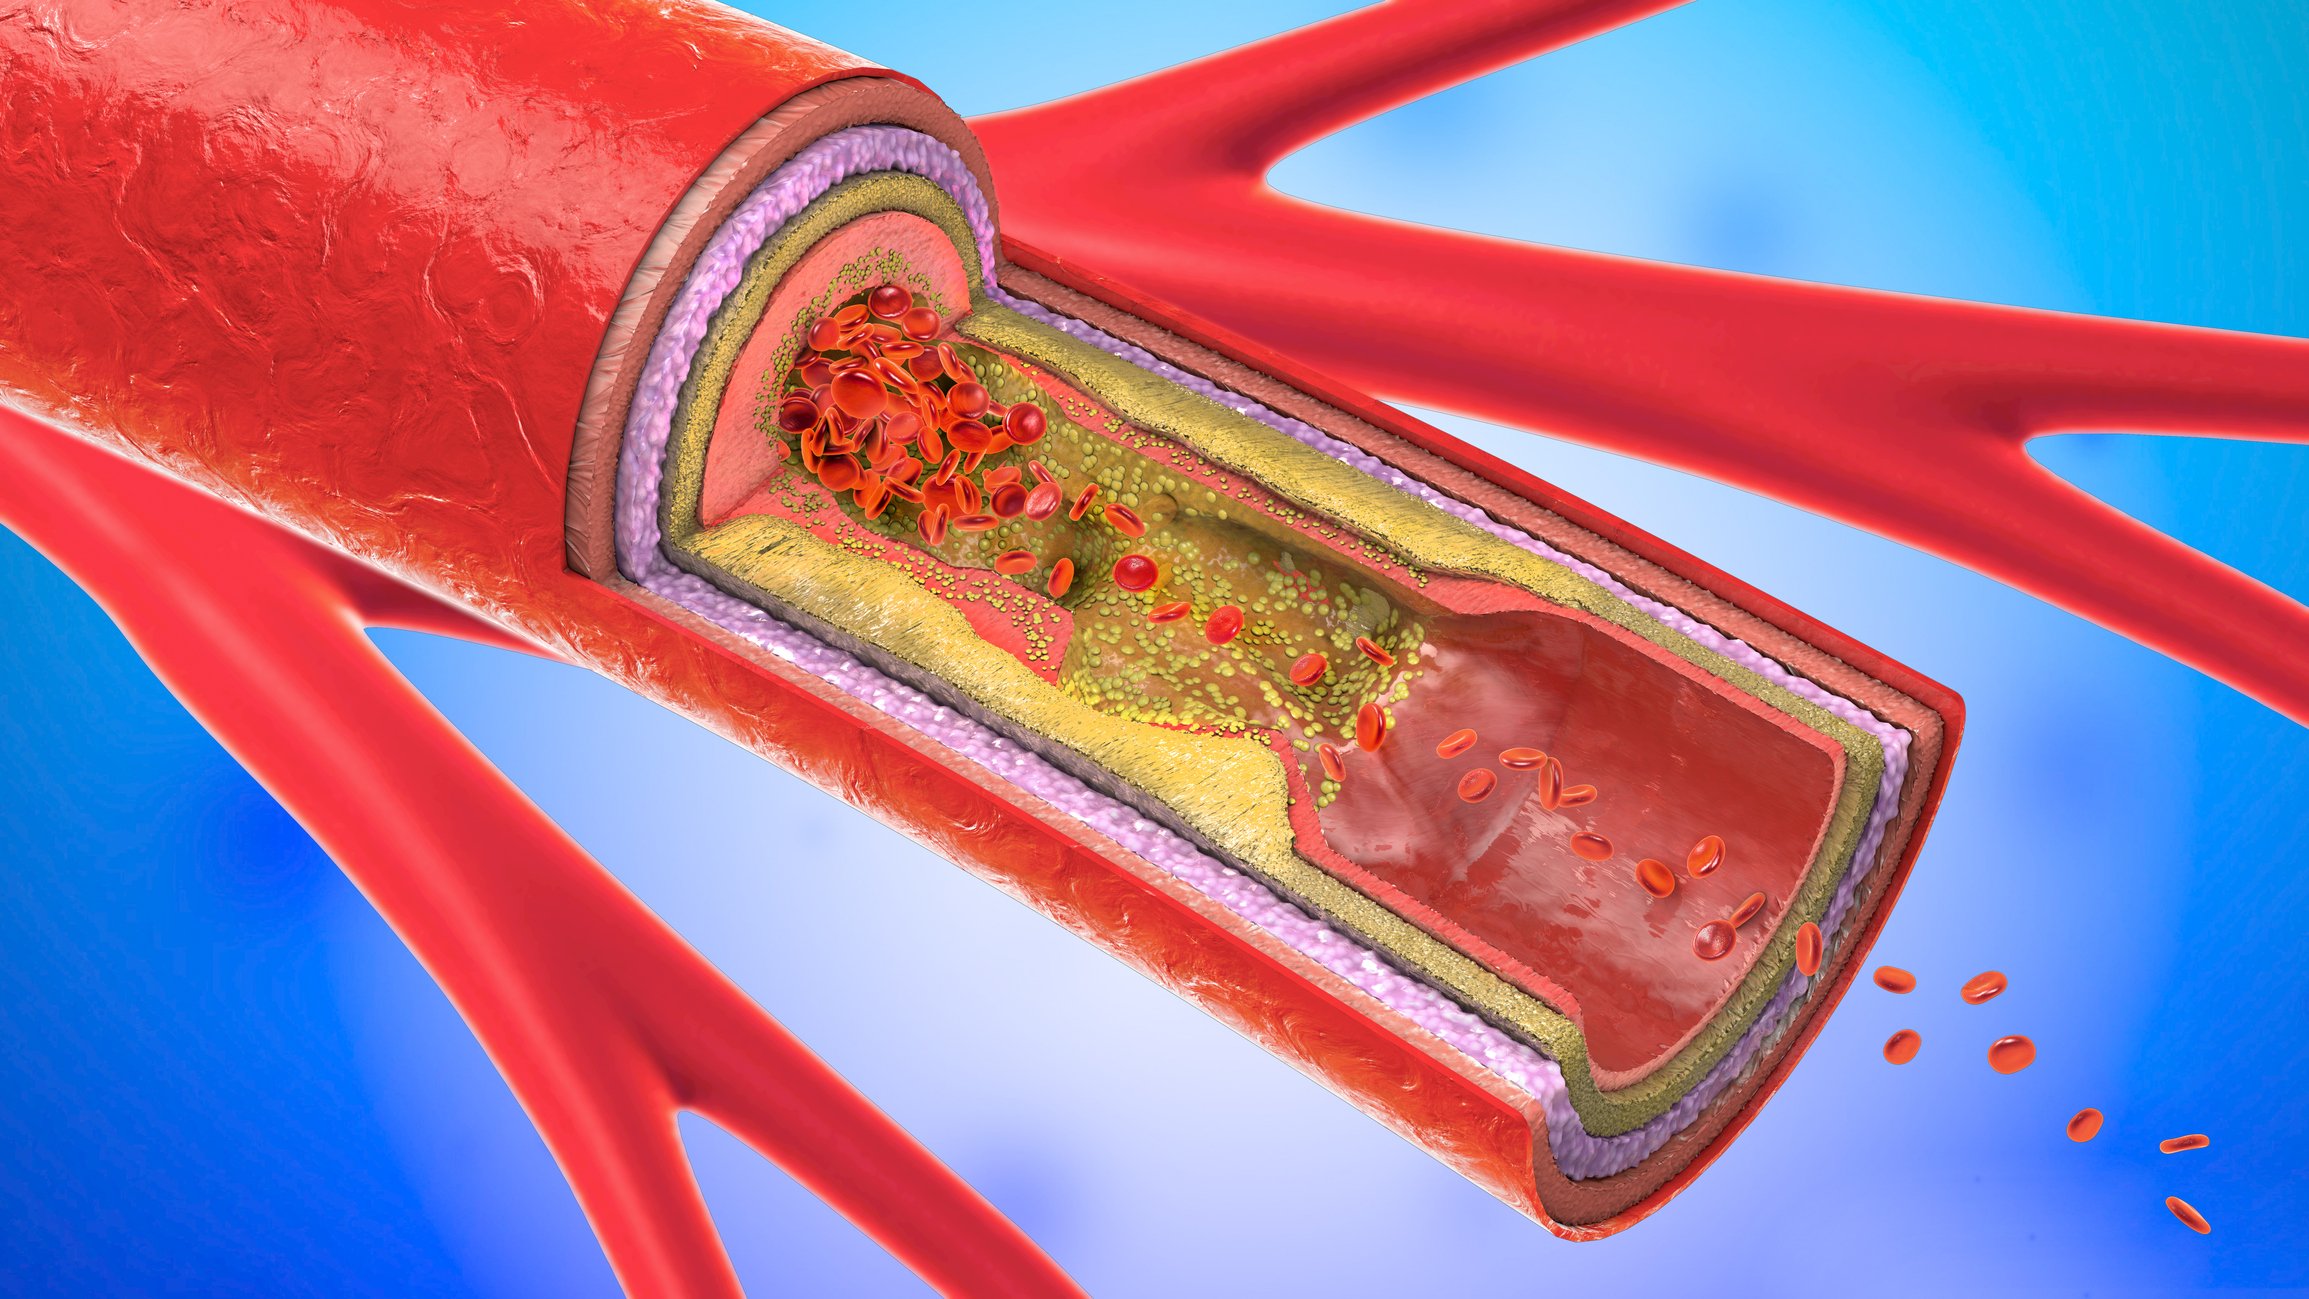 How to Keep Your Carotid Arteries Healthy